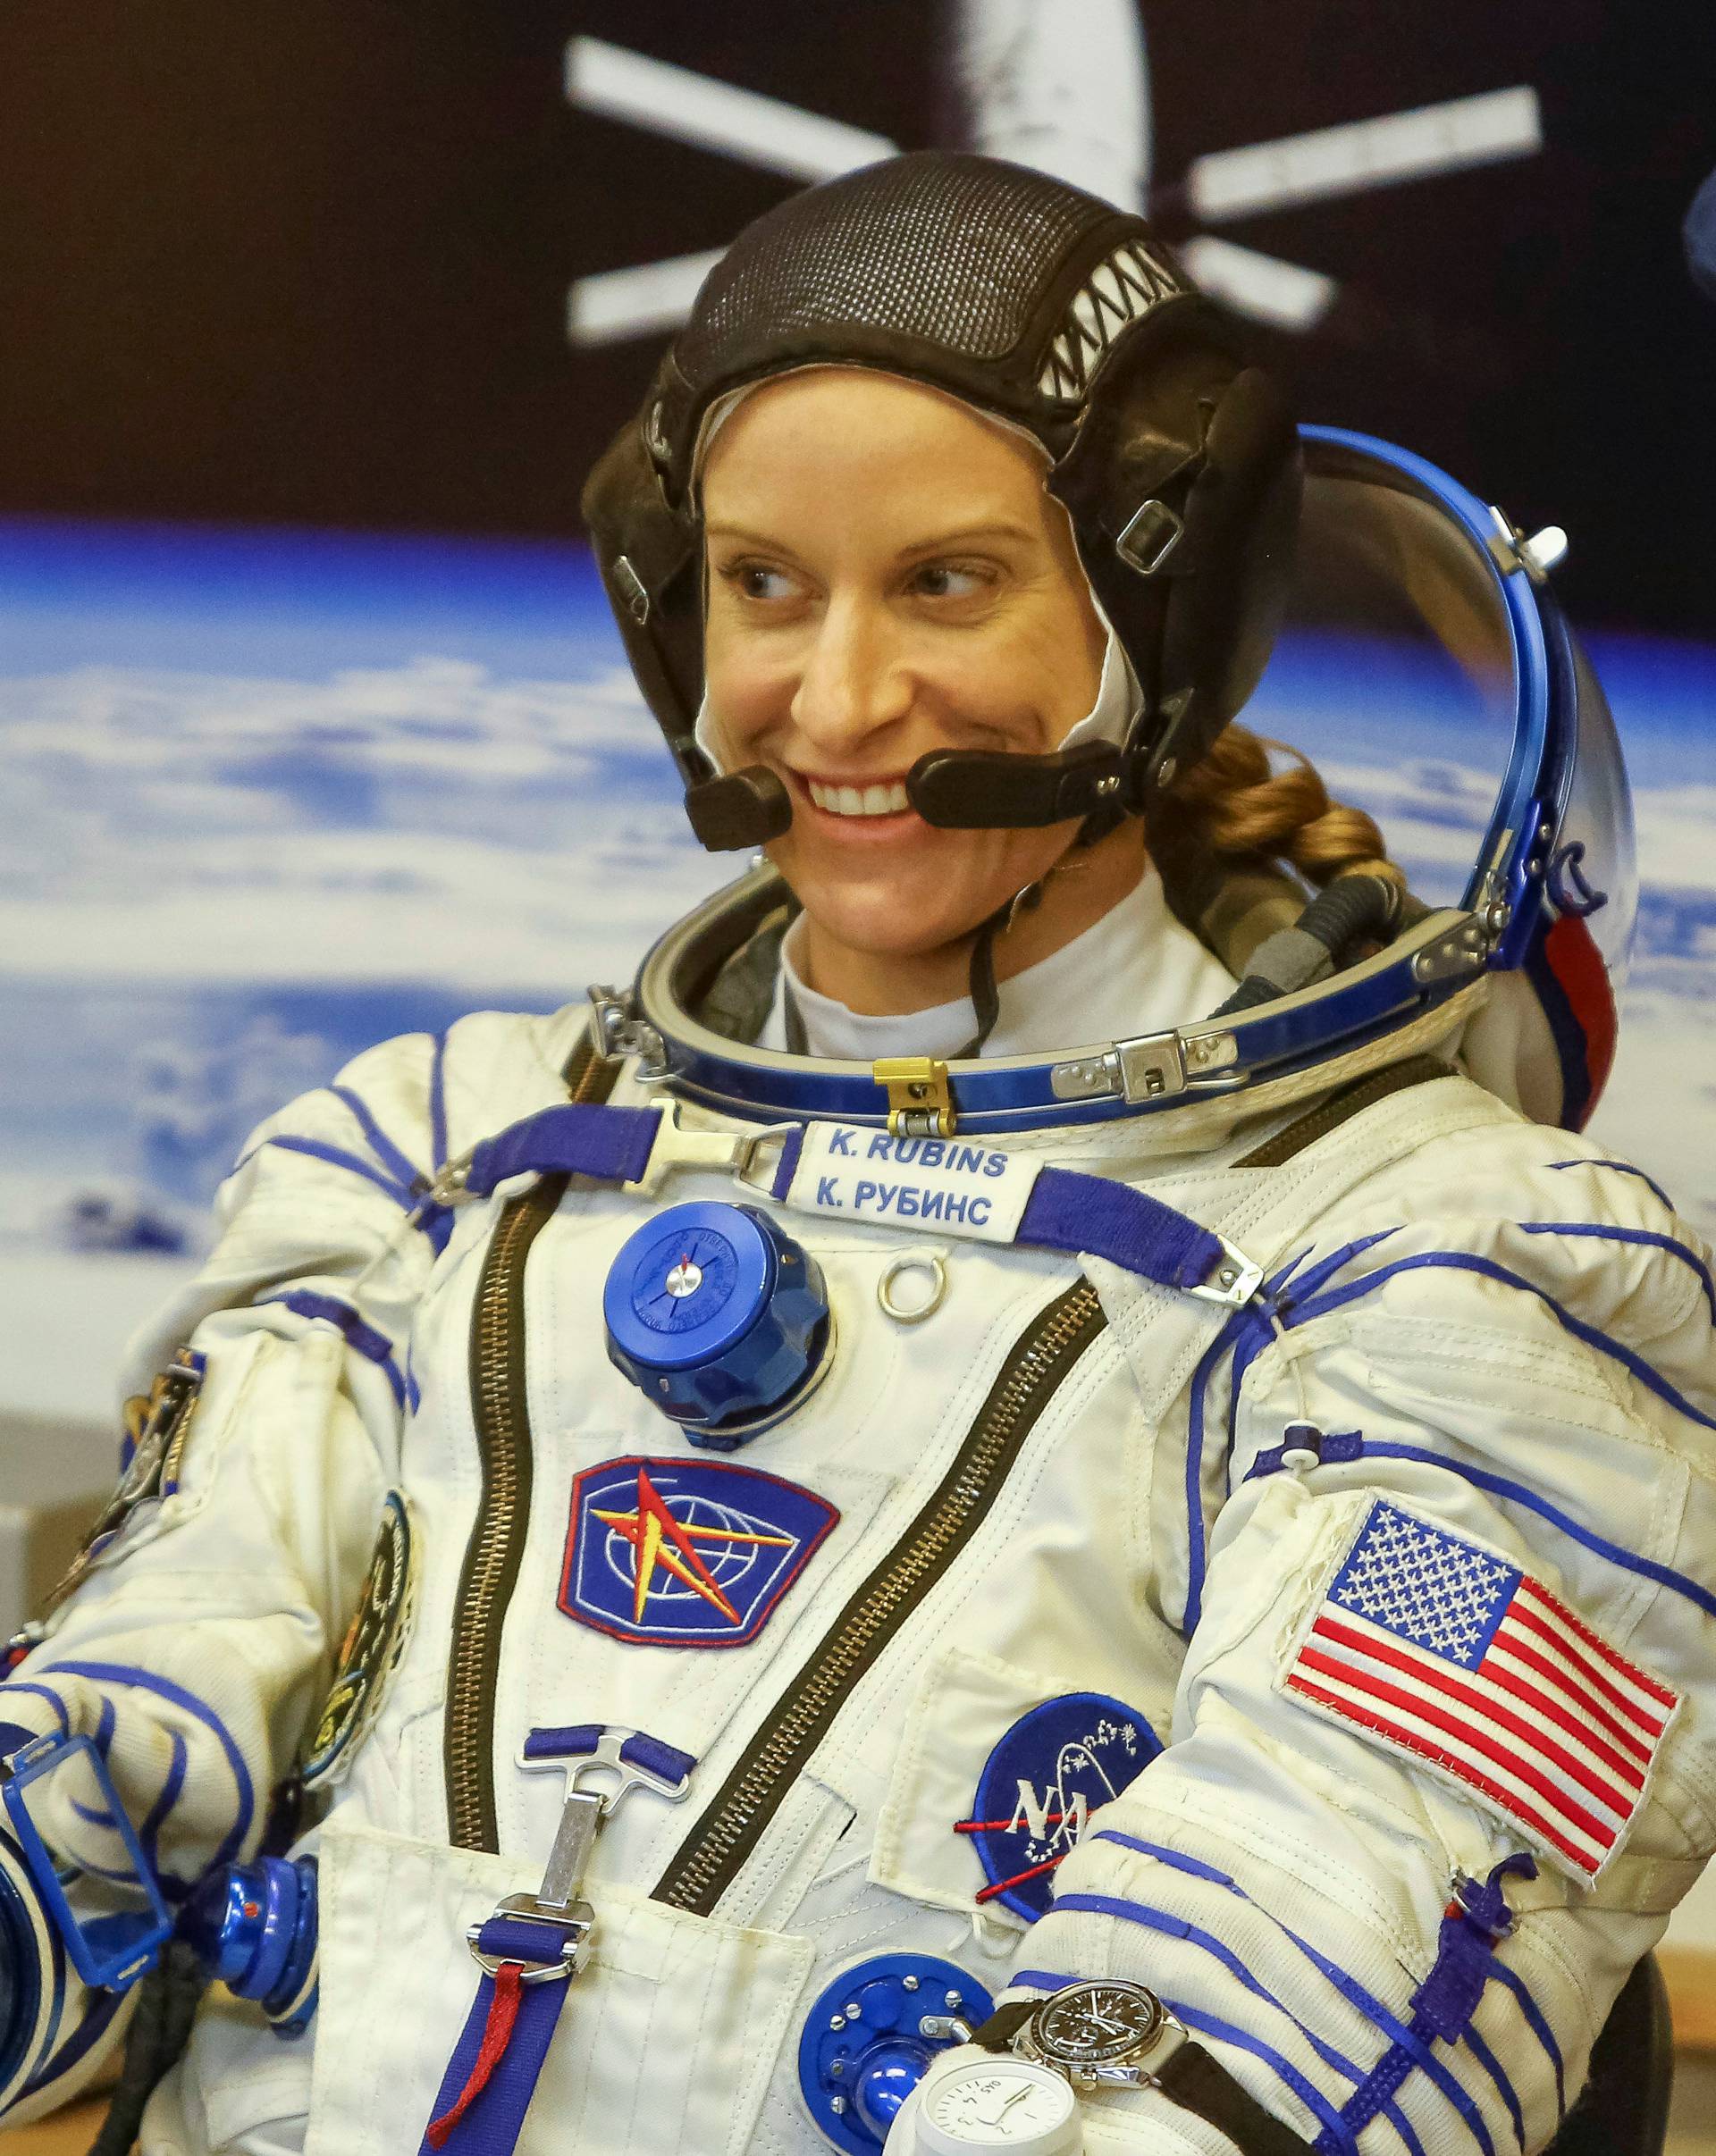 The International Space Station (ISS) crew member Kate Rubins of the U.S. gives thumb up after donning space suits at the Baikonur cosmodrome, Kazakhstan